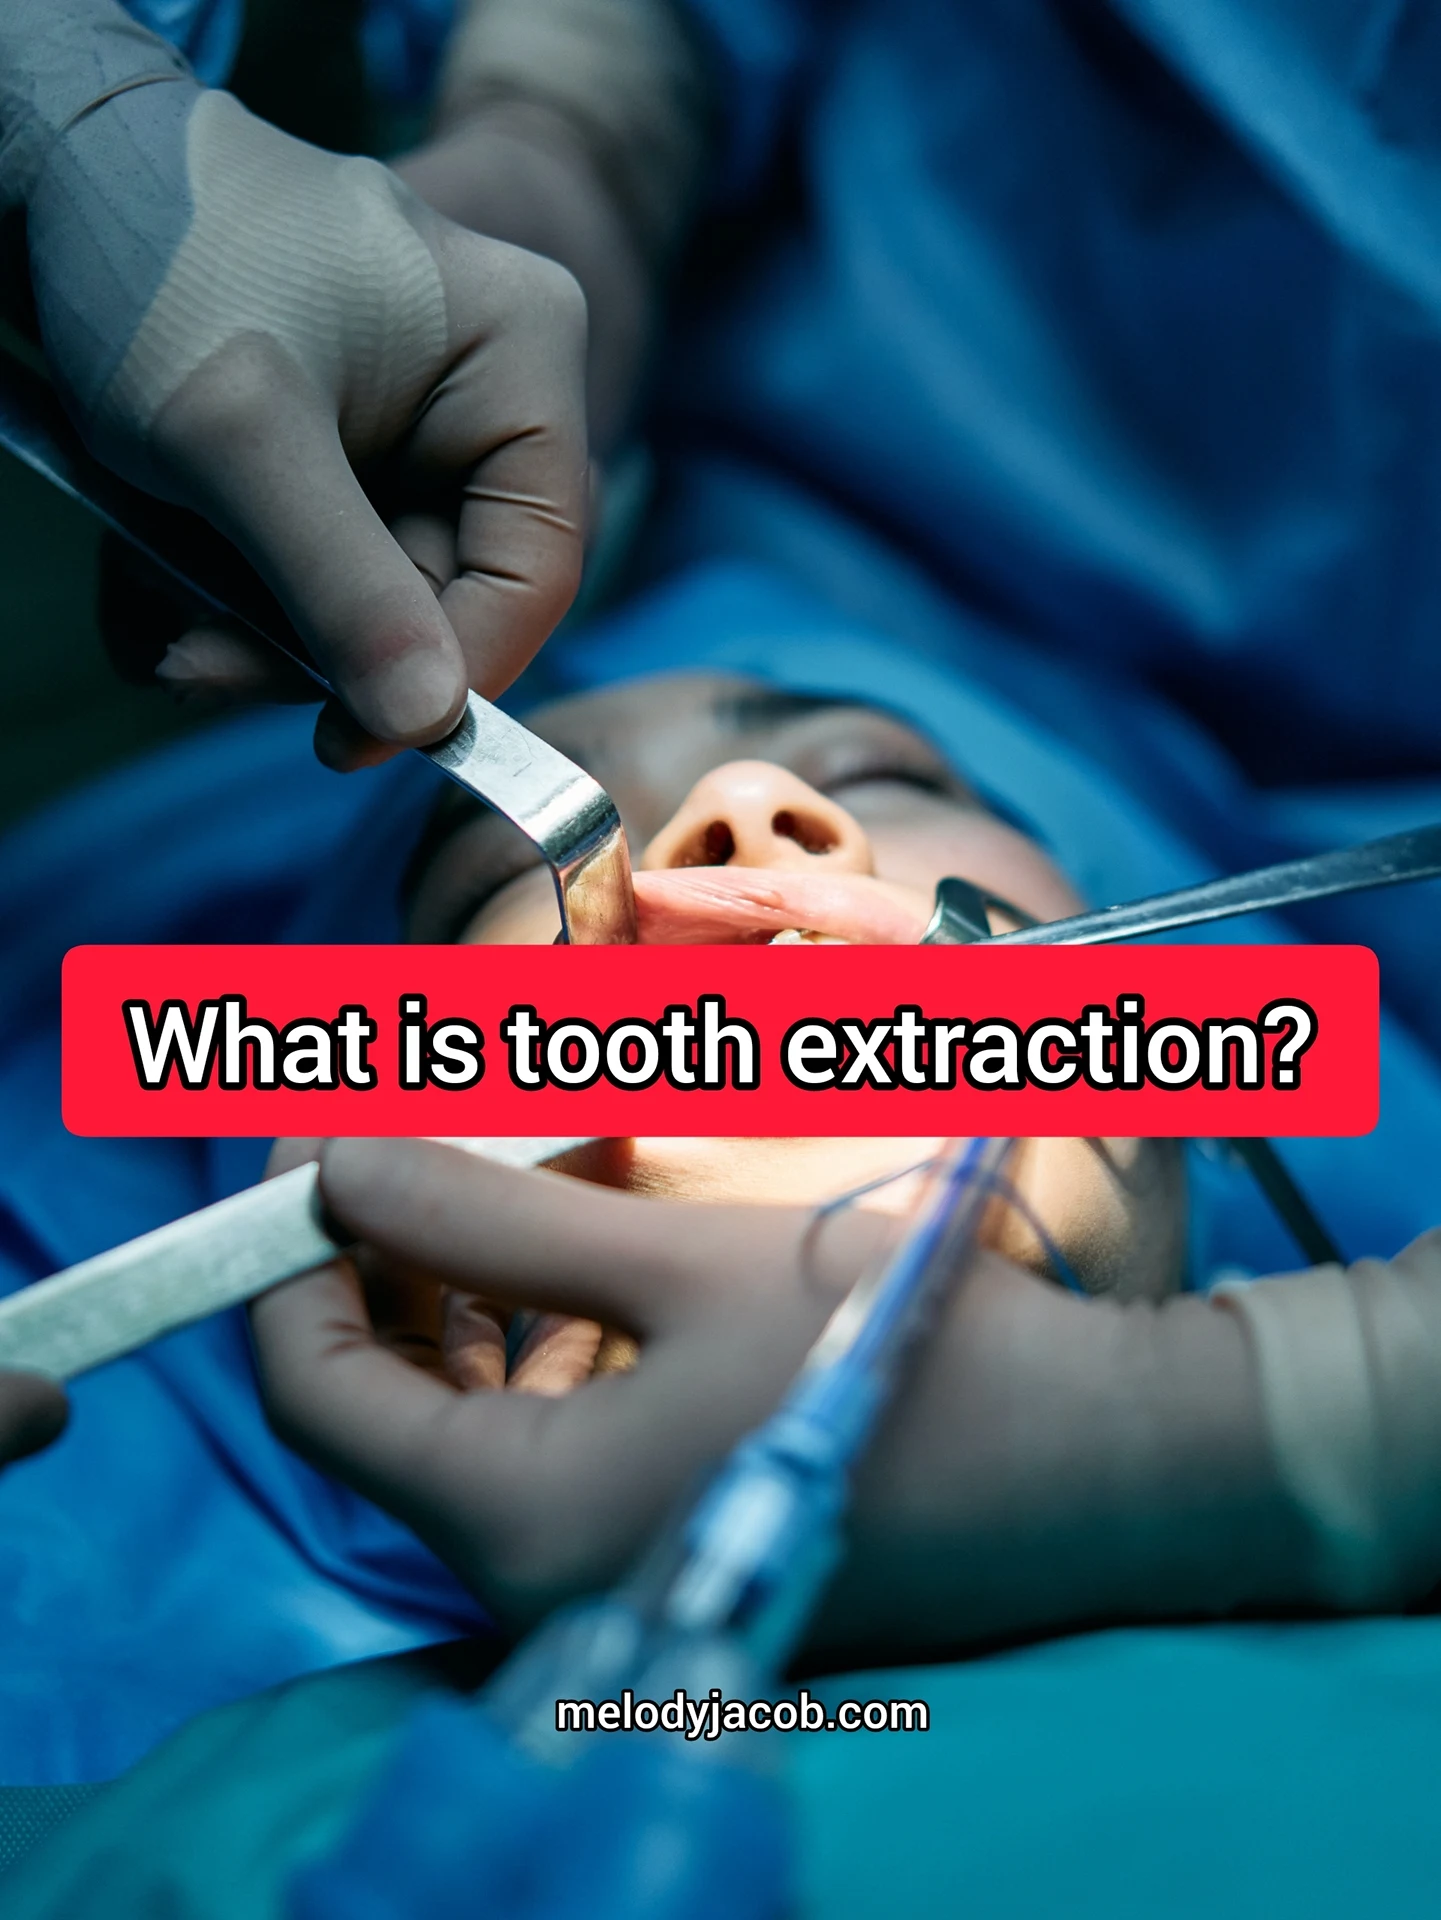 A tooth extraction process